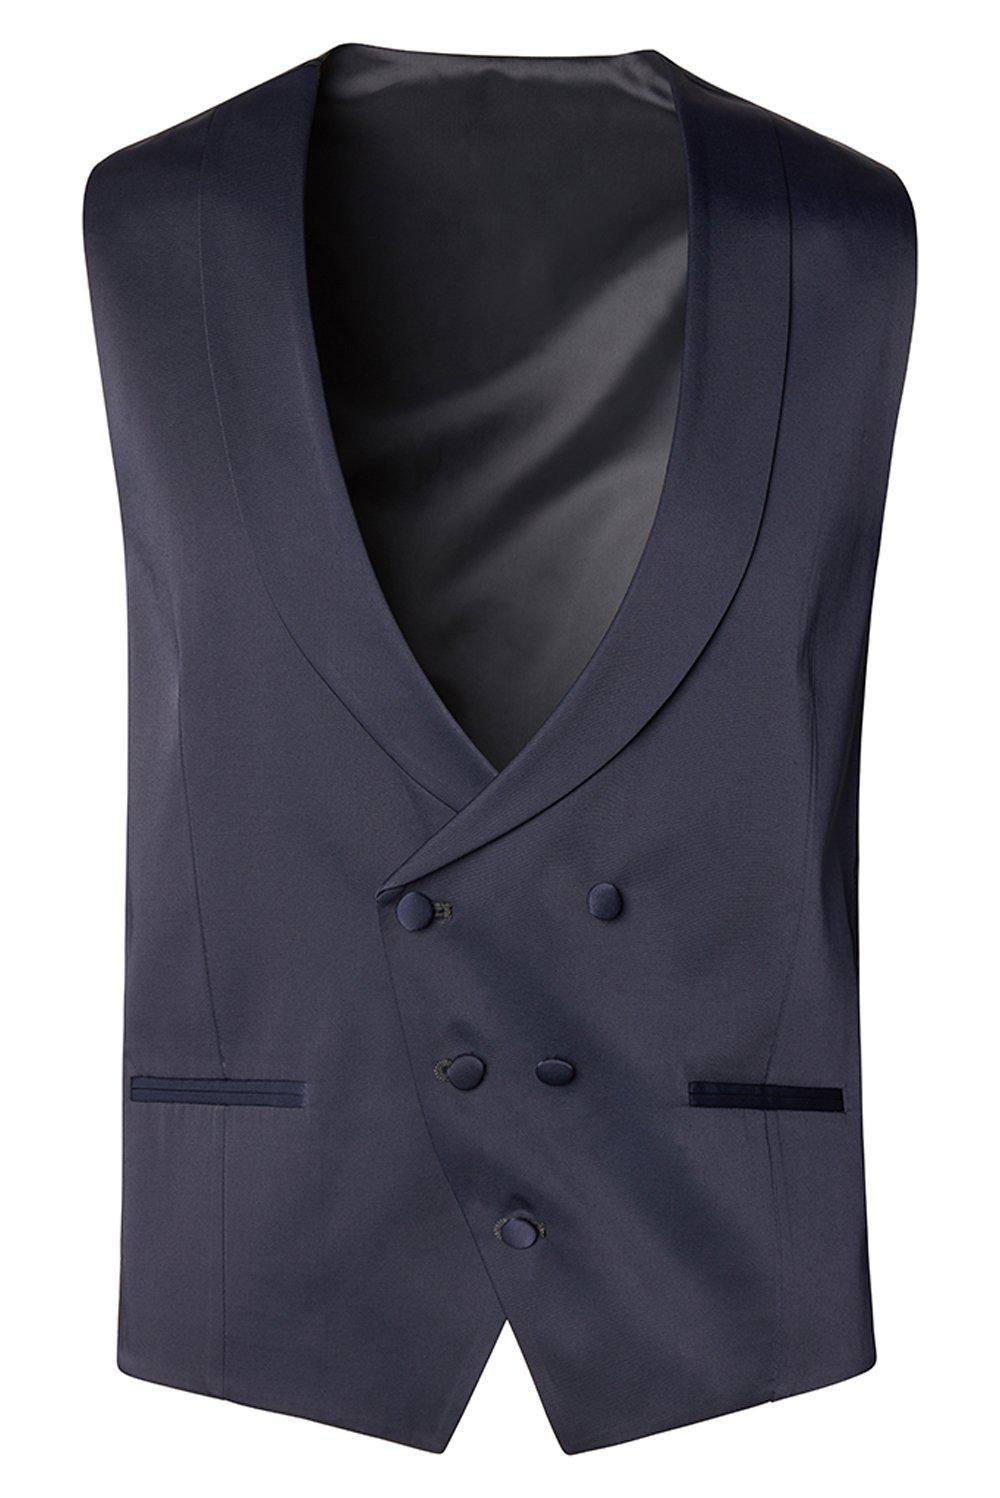 Double Breasted U-Shaped Vest - Navy - Ron Tomson